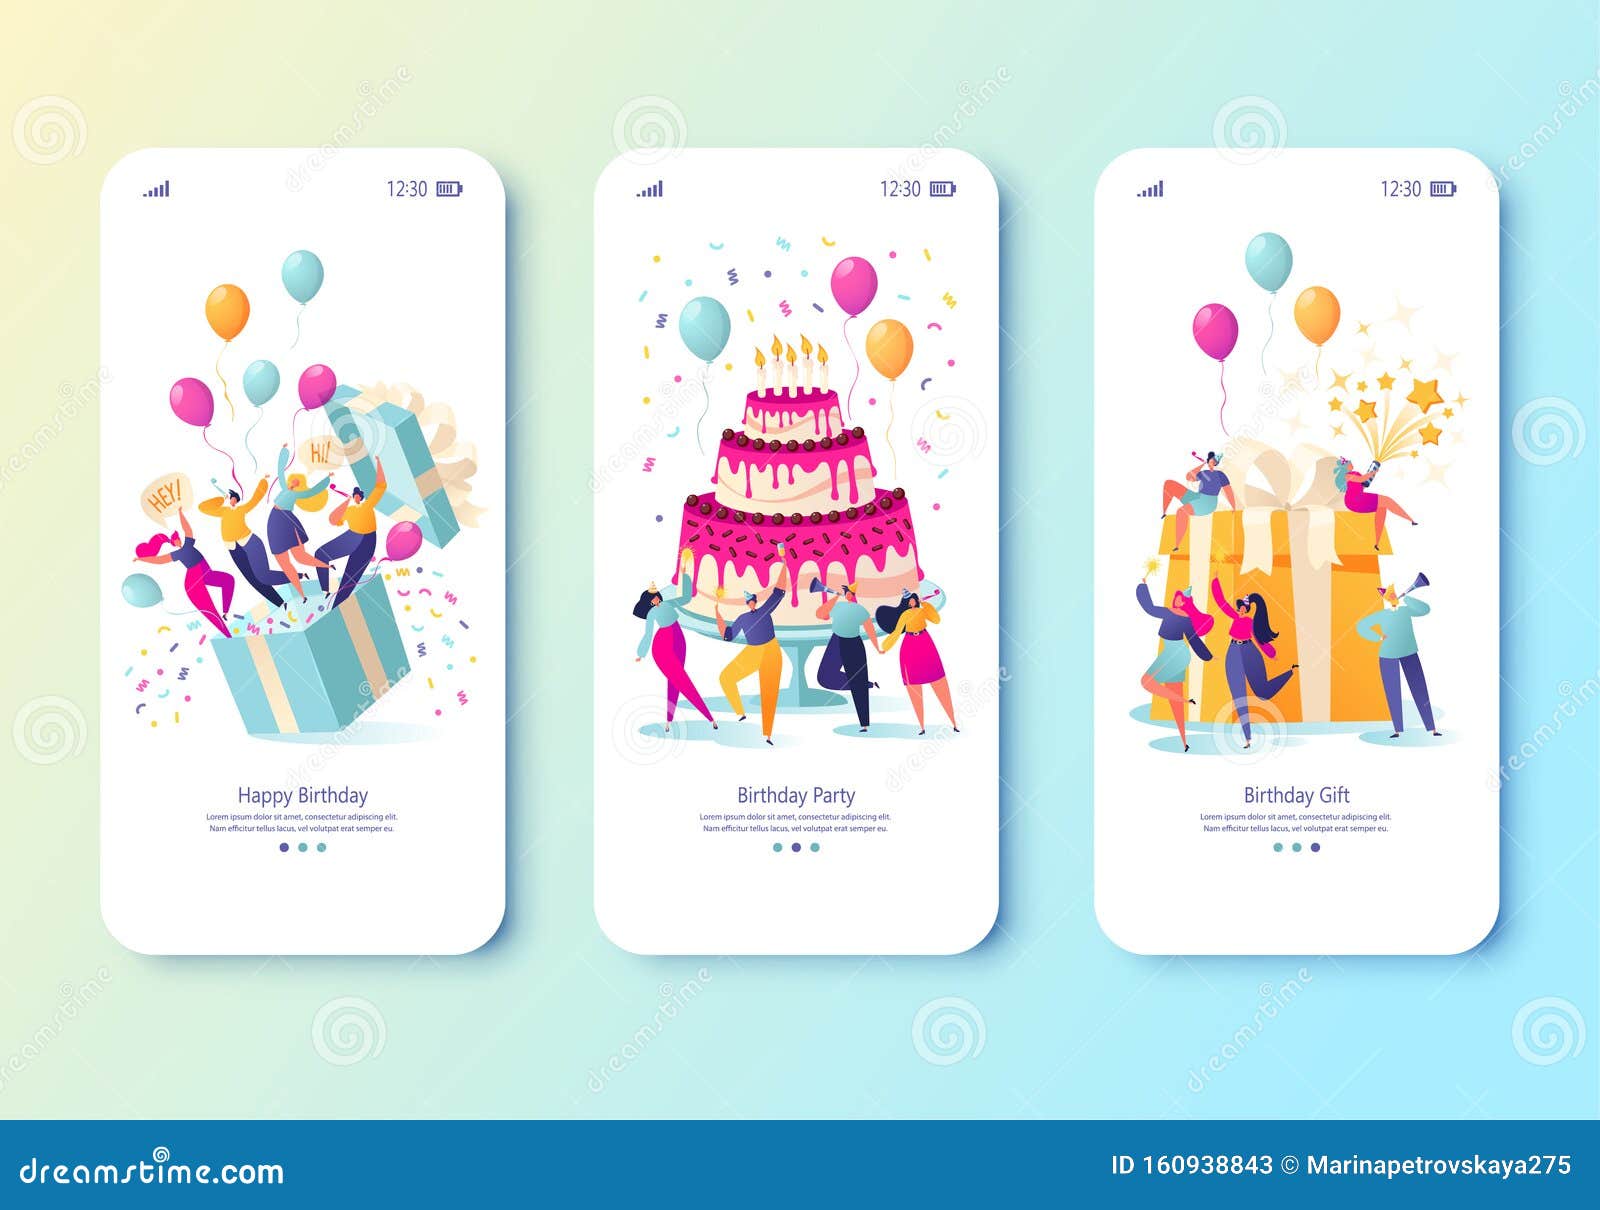 template for mobile app page with birthday celebrations theme. party celebration with friends.